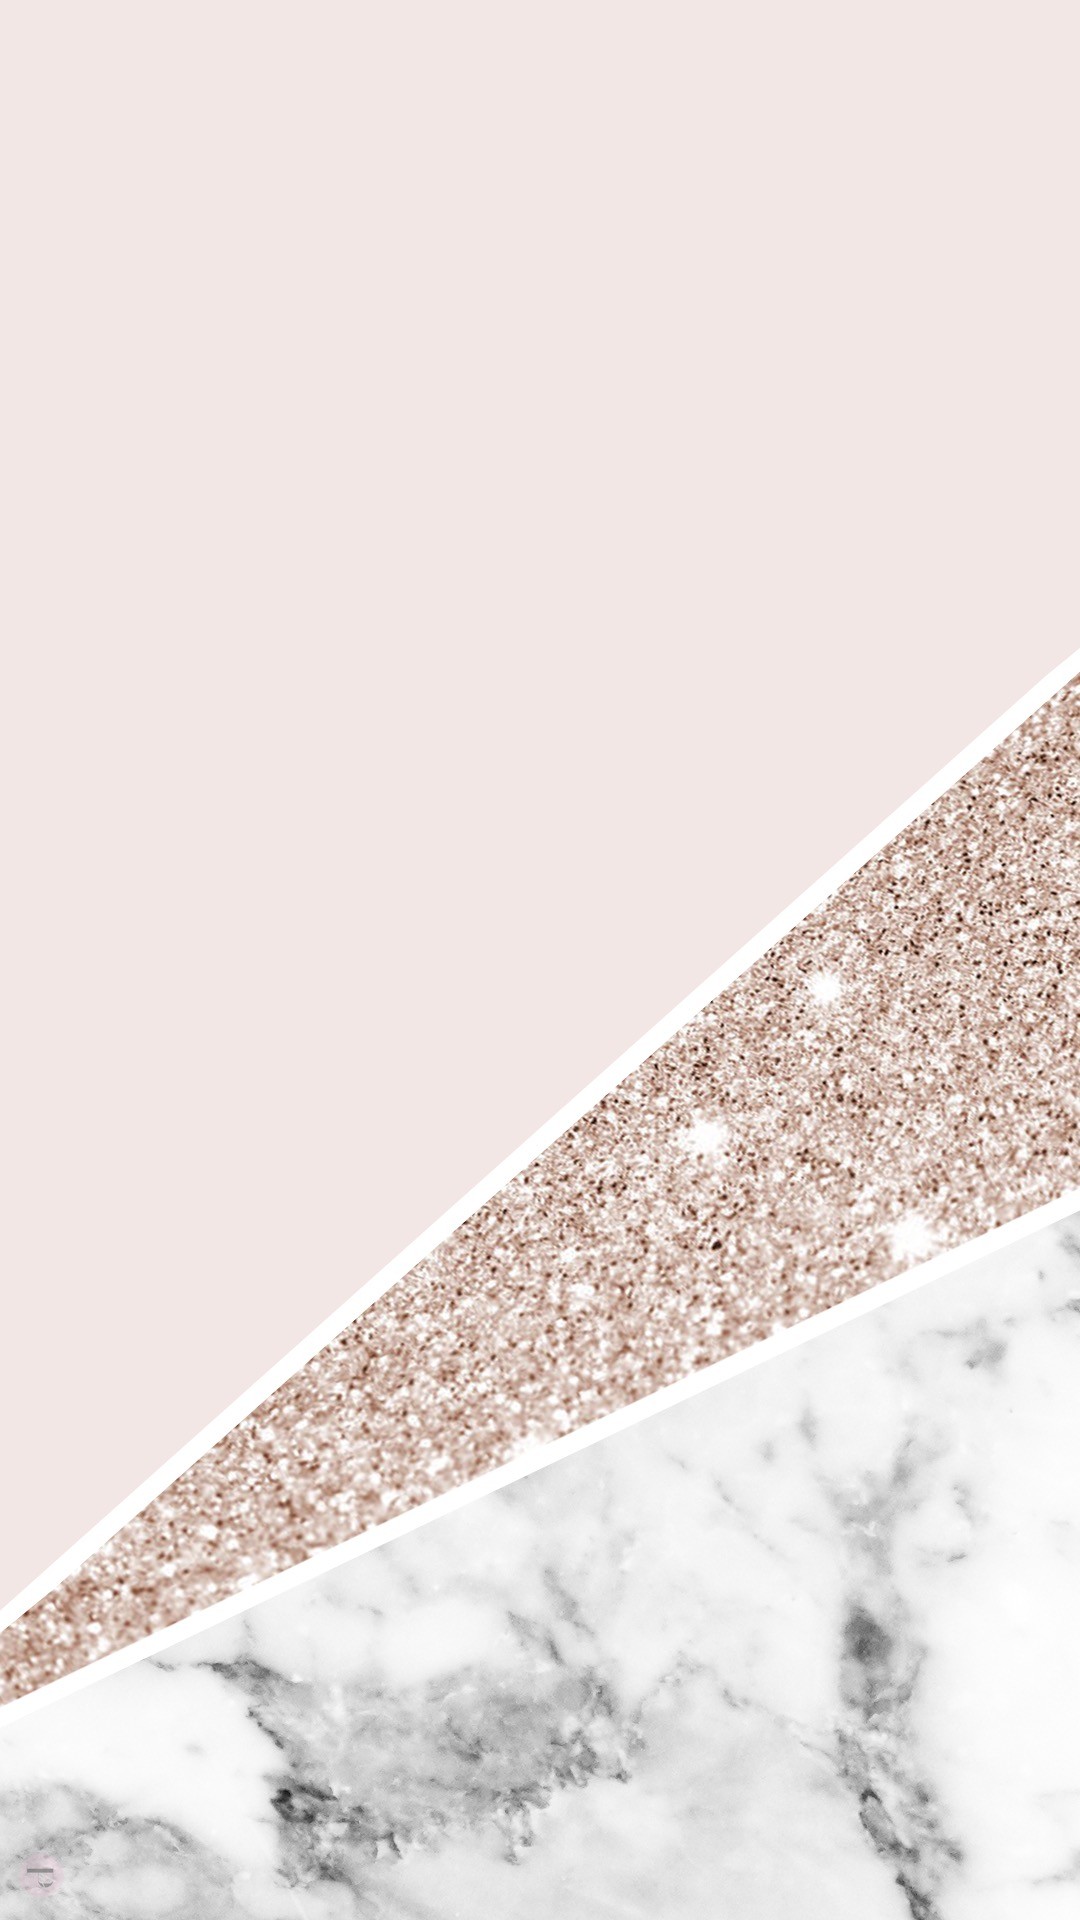 Explore Pink Marble Wallpaper and more!